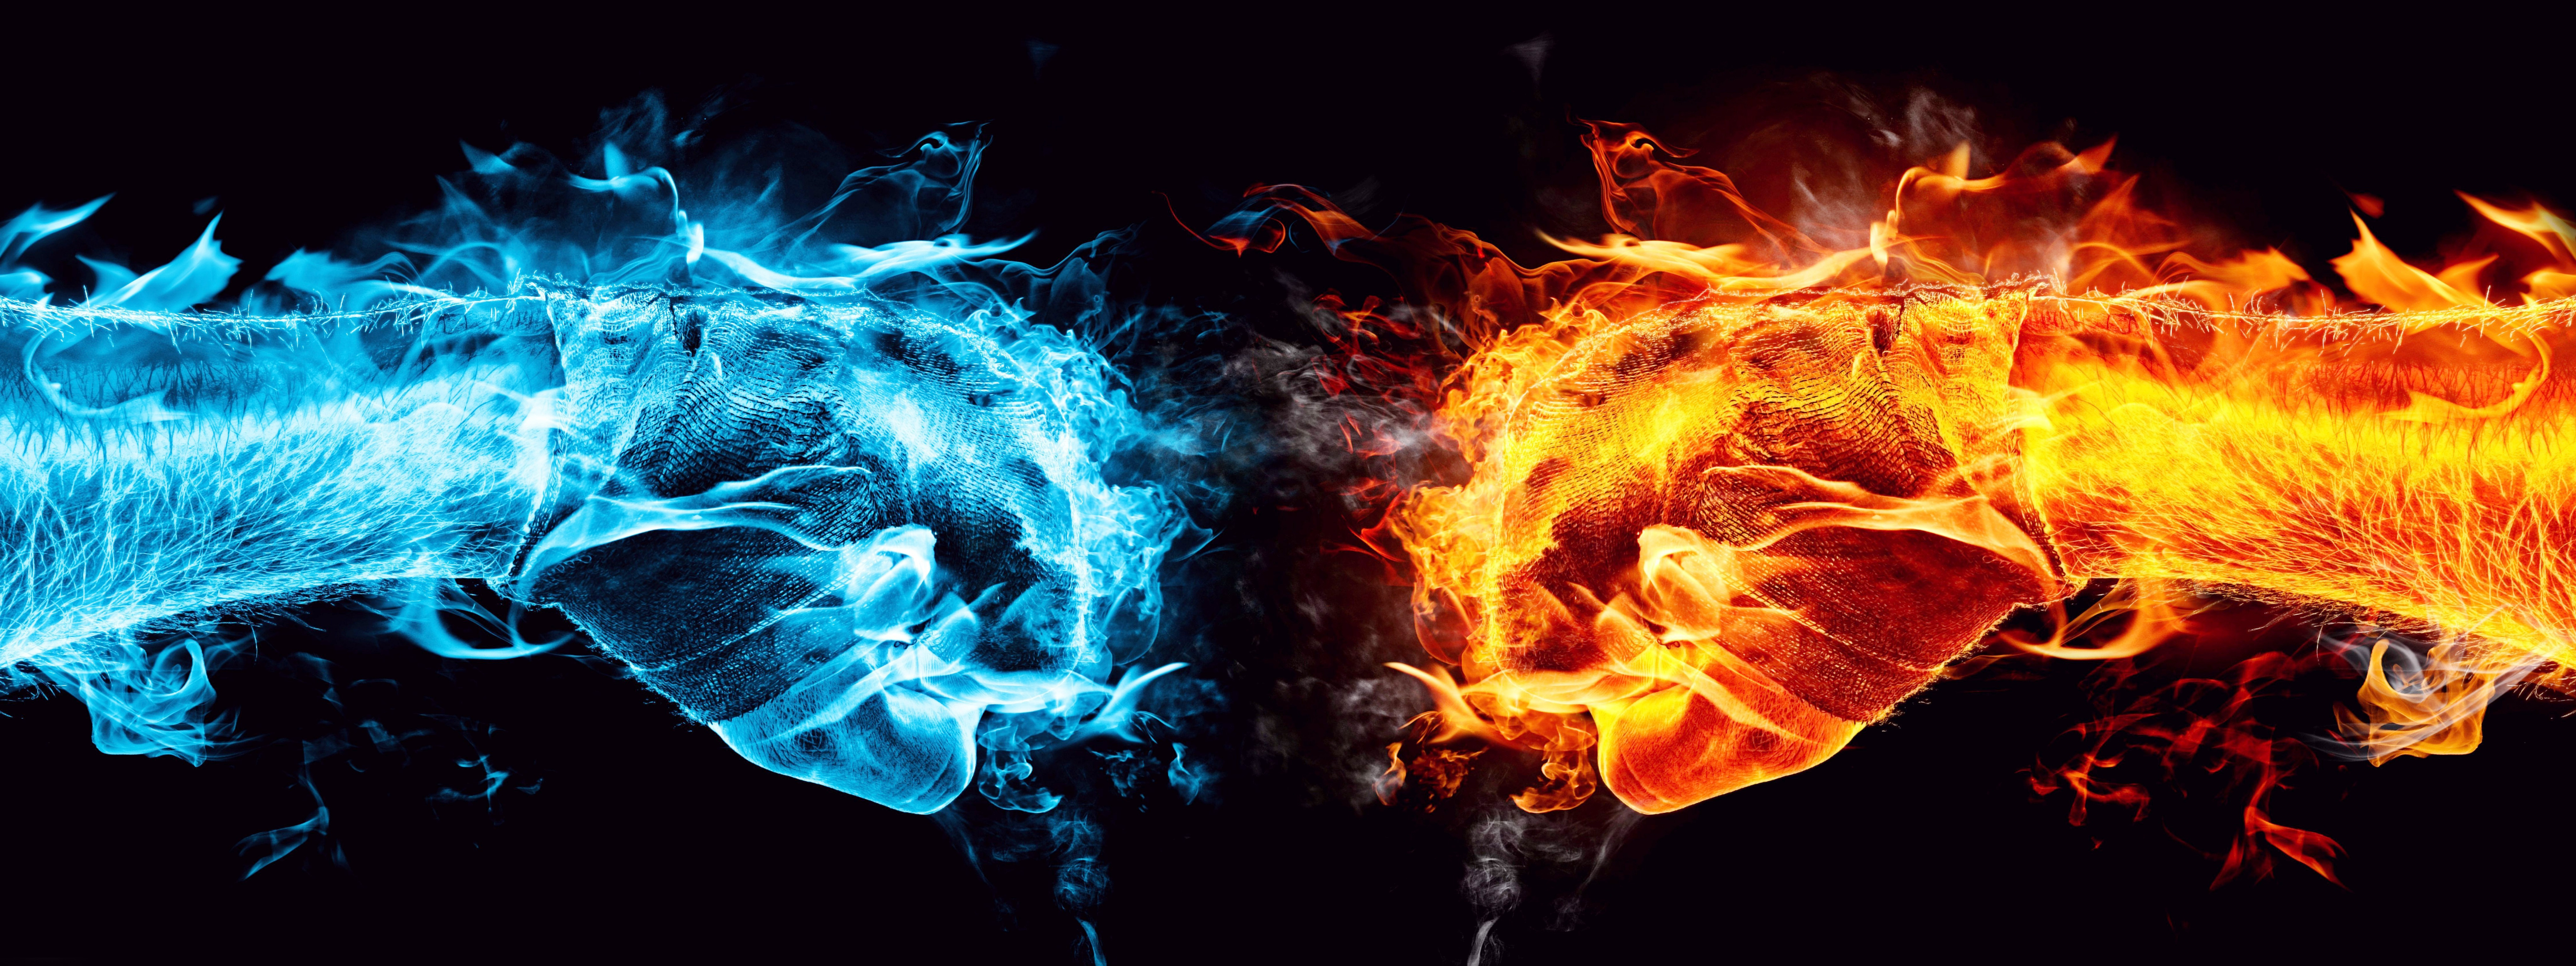 Water And Fire Fists Battle Dual Screen Wallpapers HD Desktop and